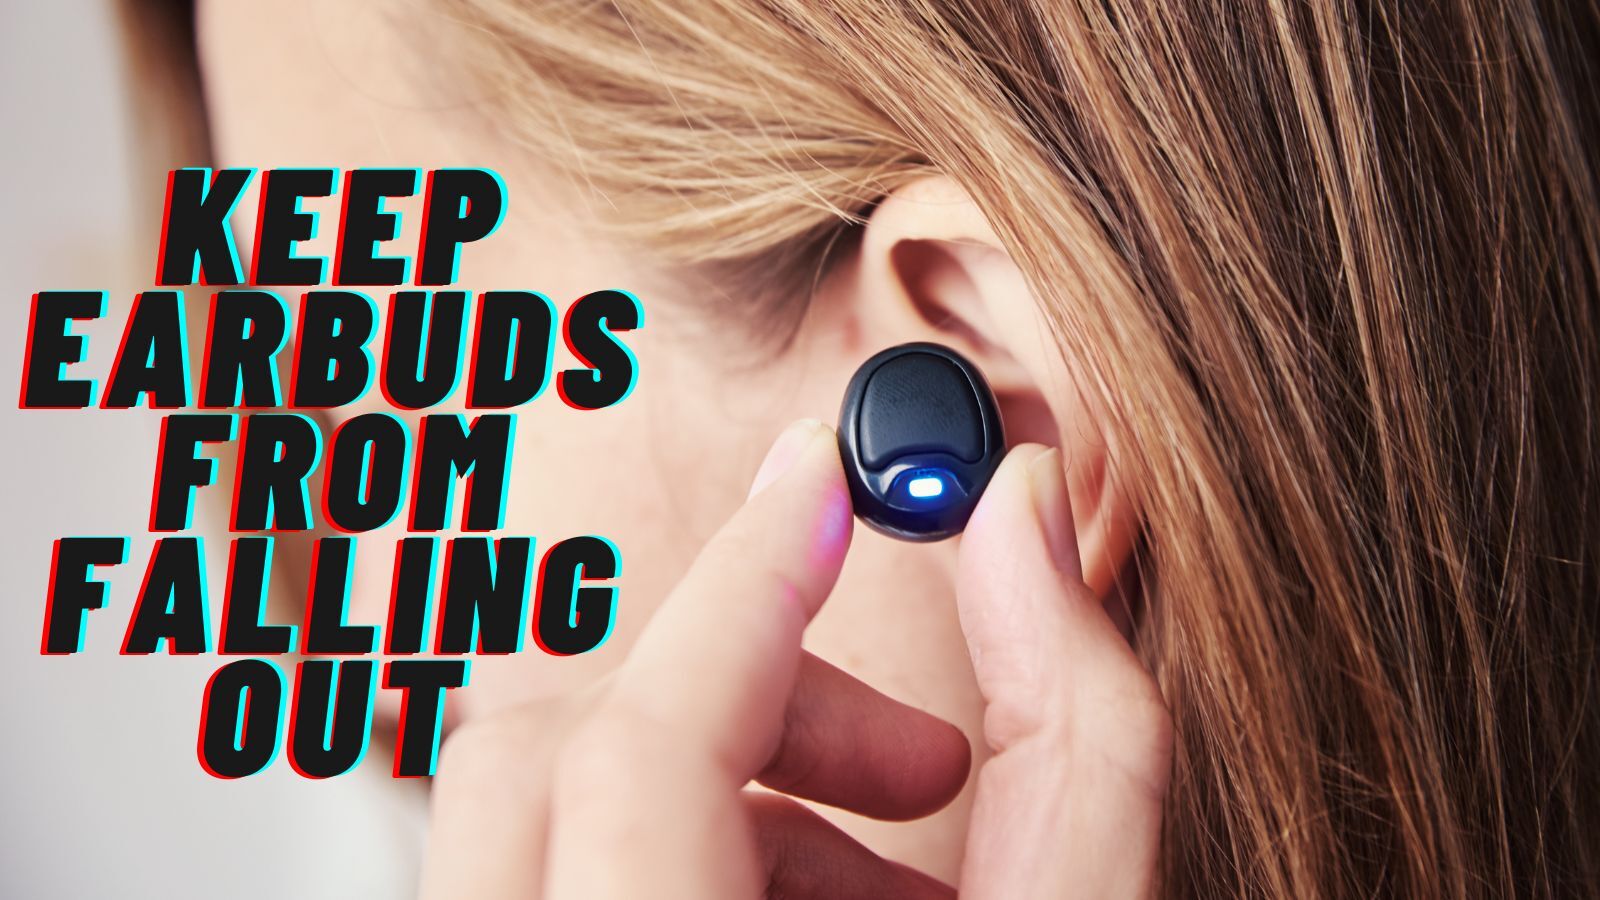 How to Keep Earbuds from Falling Out? (A Full Guide)